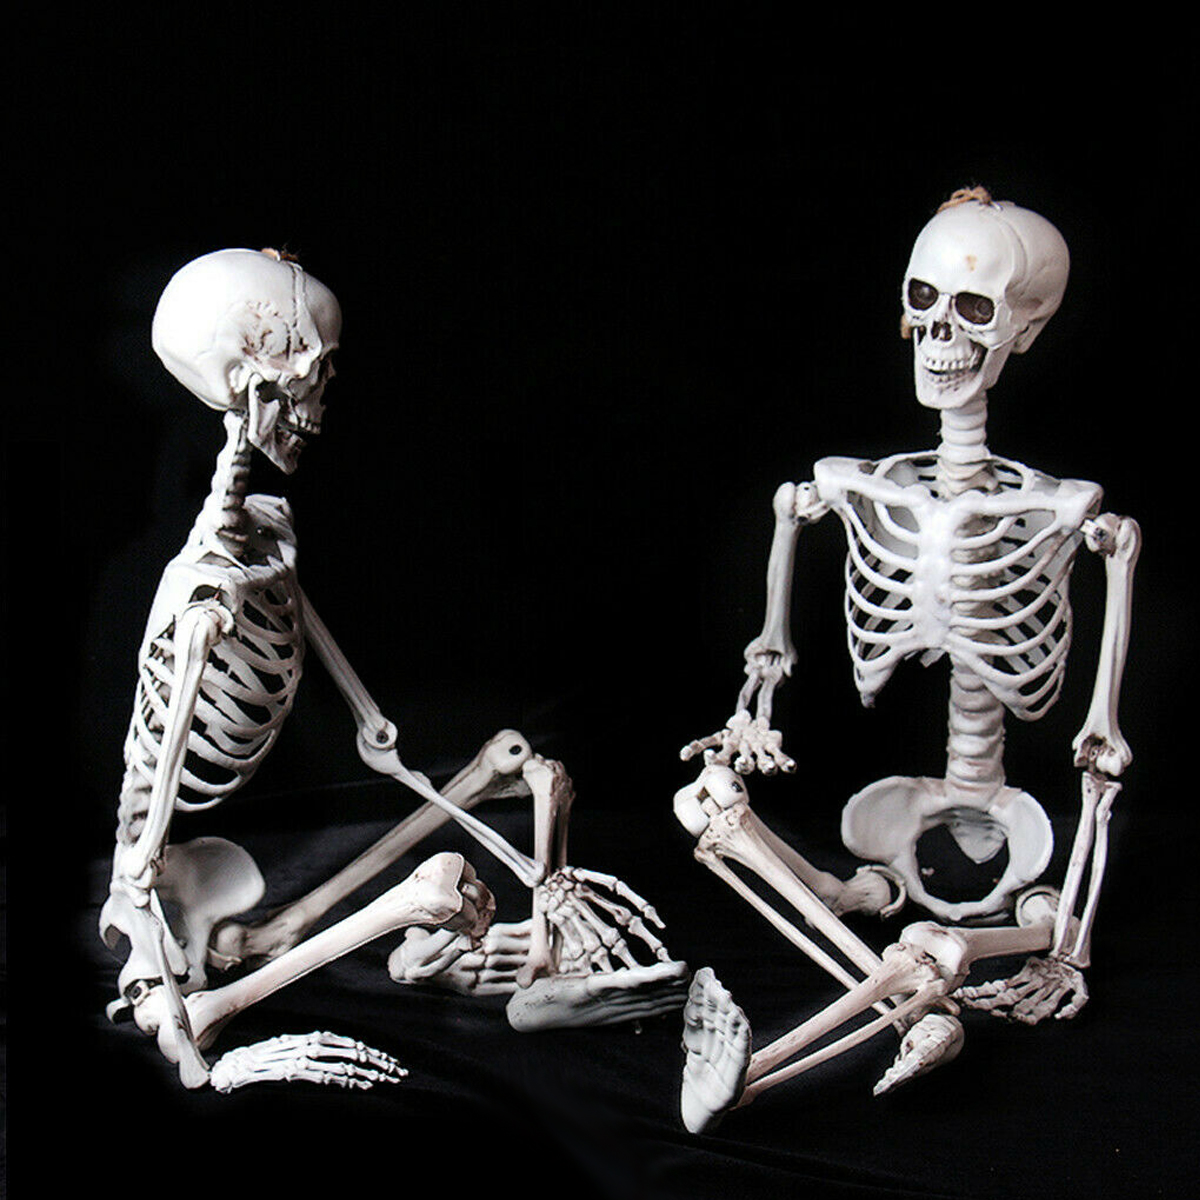 90cm-Human-Skeleton-Scary-Bones-Poseable-Hanging-Halloween-Prop-Party-Decorations-1573645-4